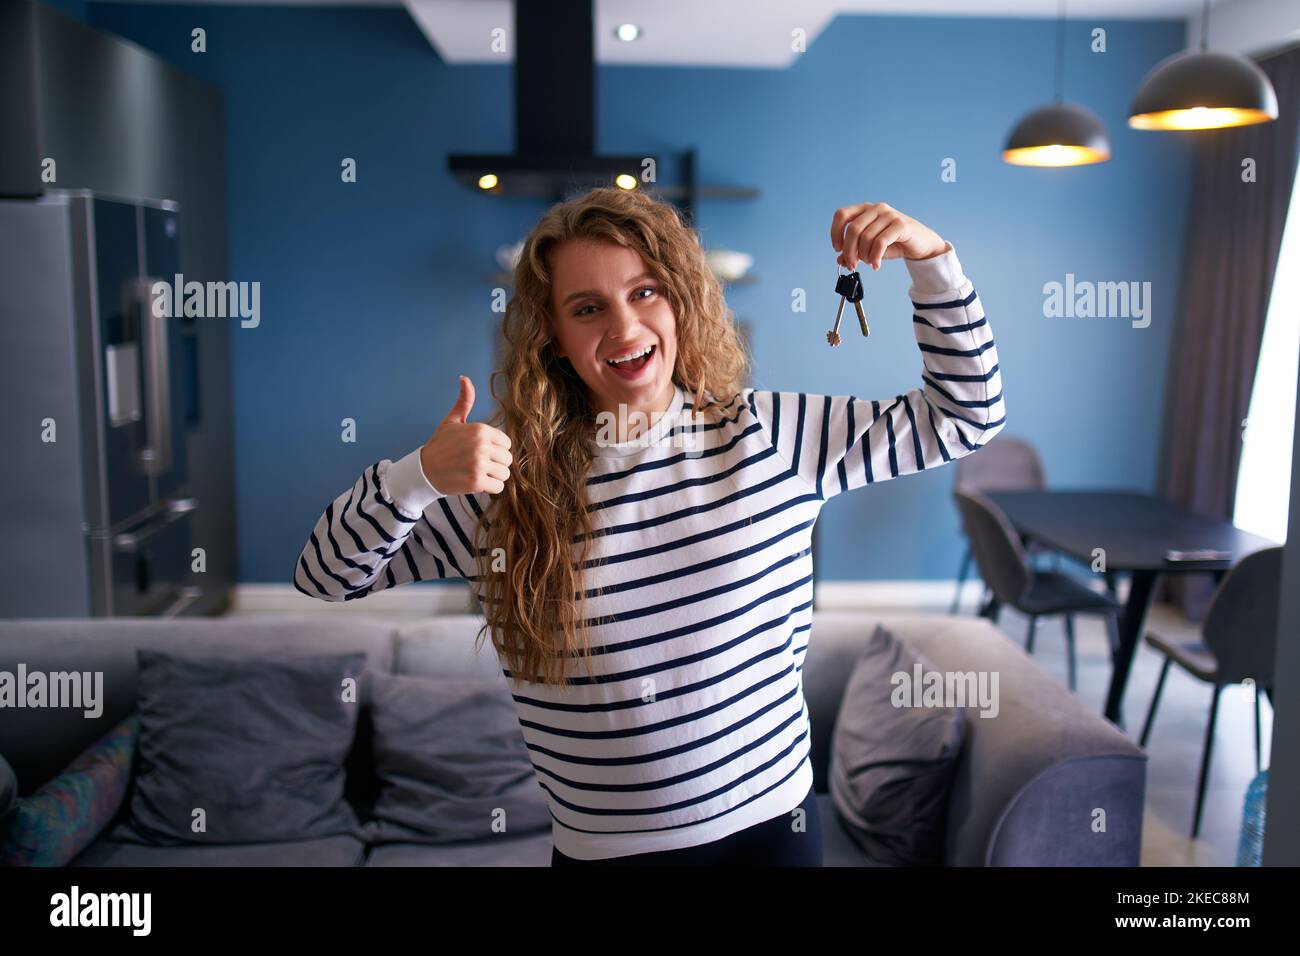 Happy woman showing new house or apartment keys to camera in modern interior. Female tenant renter with new home keys moving to tenancy. Lady Stock Photo